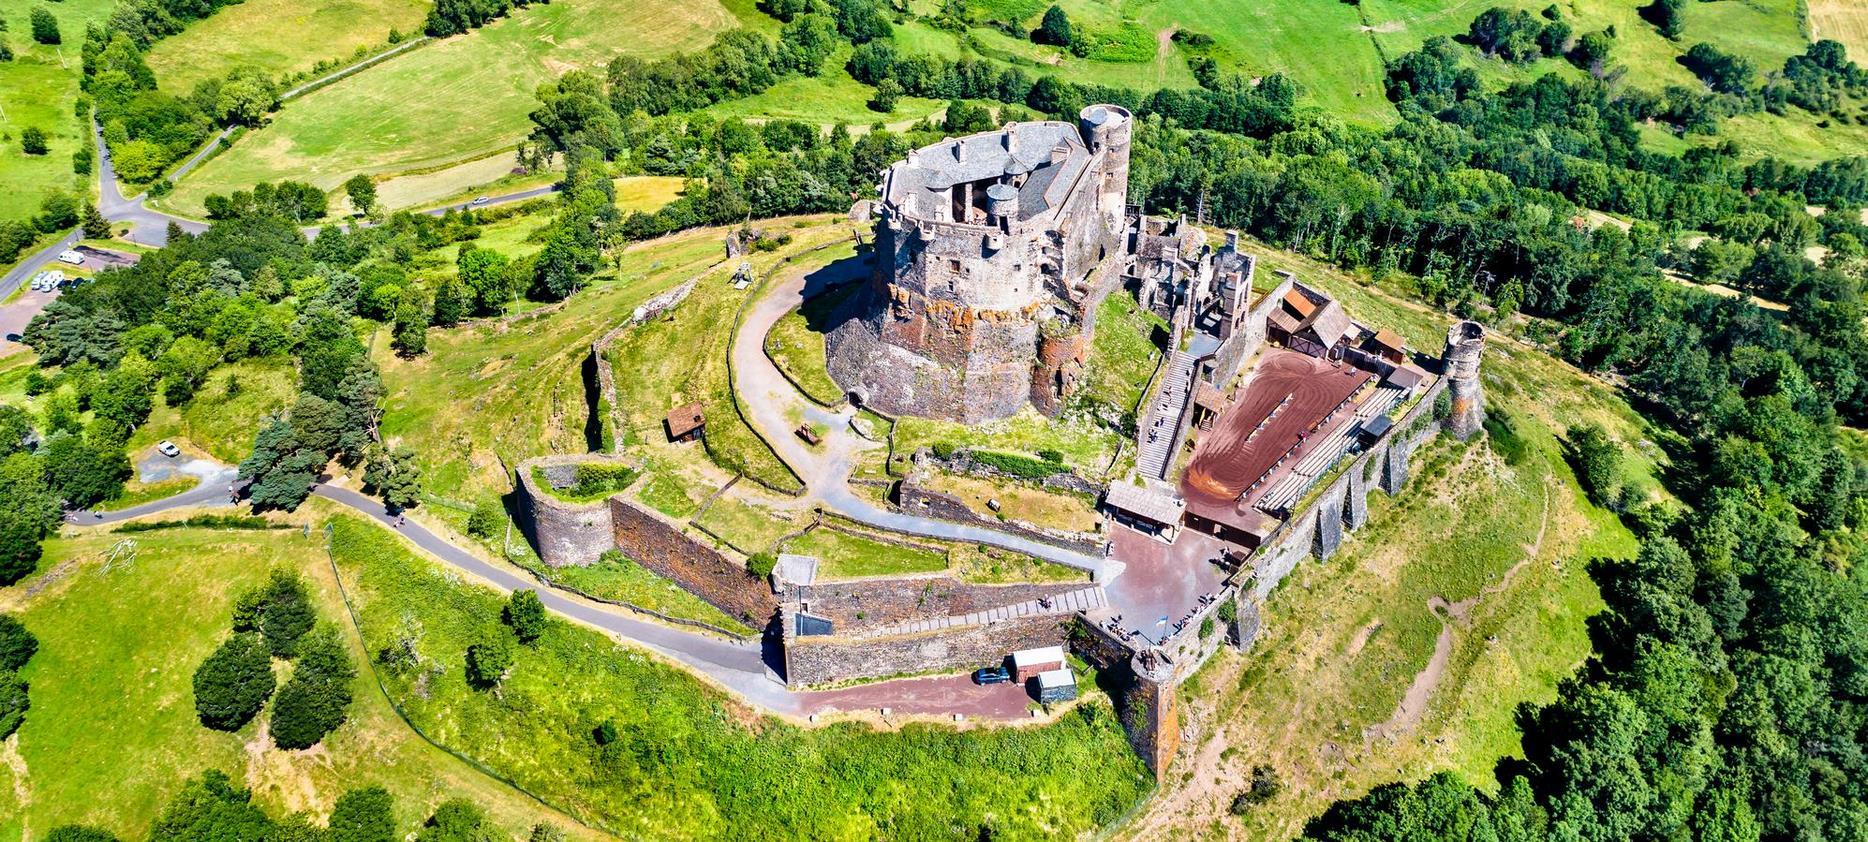 Aerial view of the castle of Murol, fortified castle in Auvergne